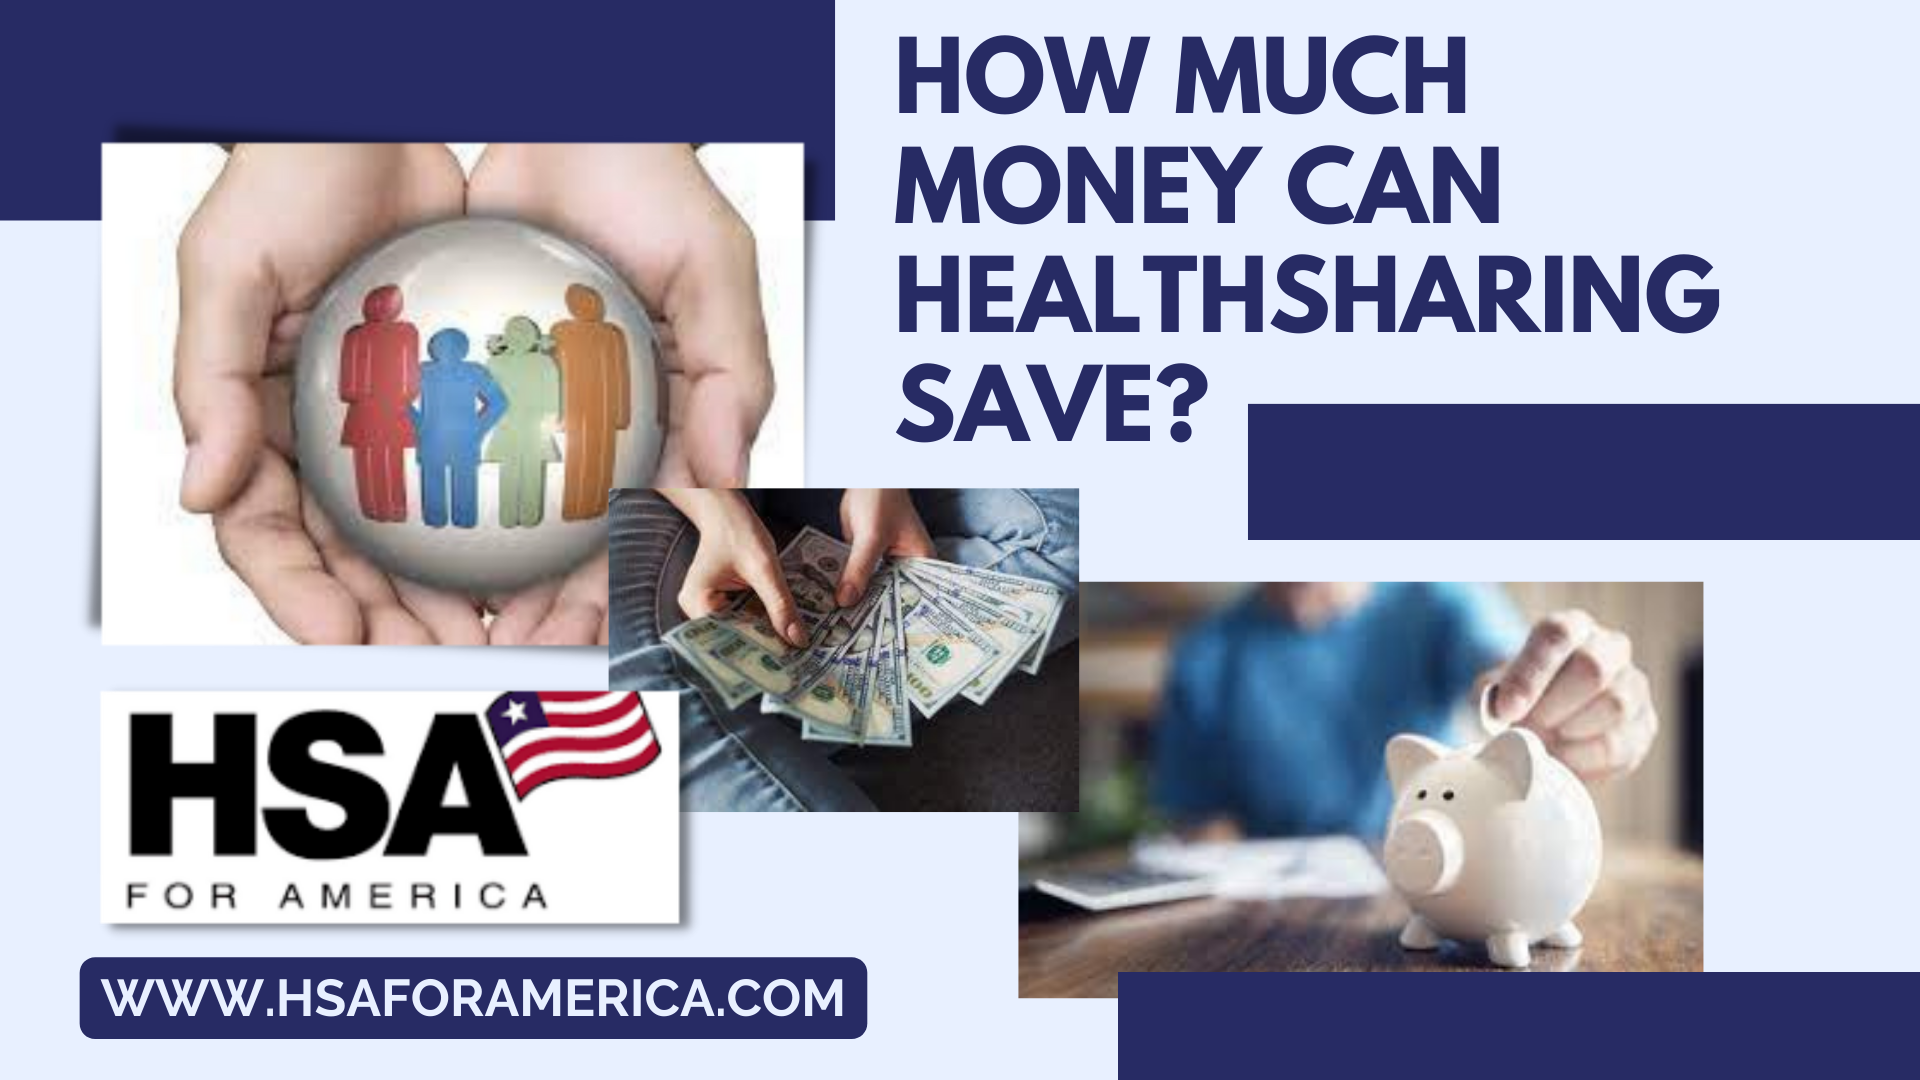 How Much Money Can Healthsharing Save?